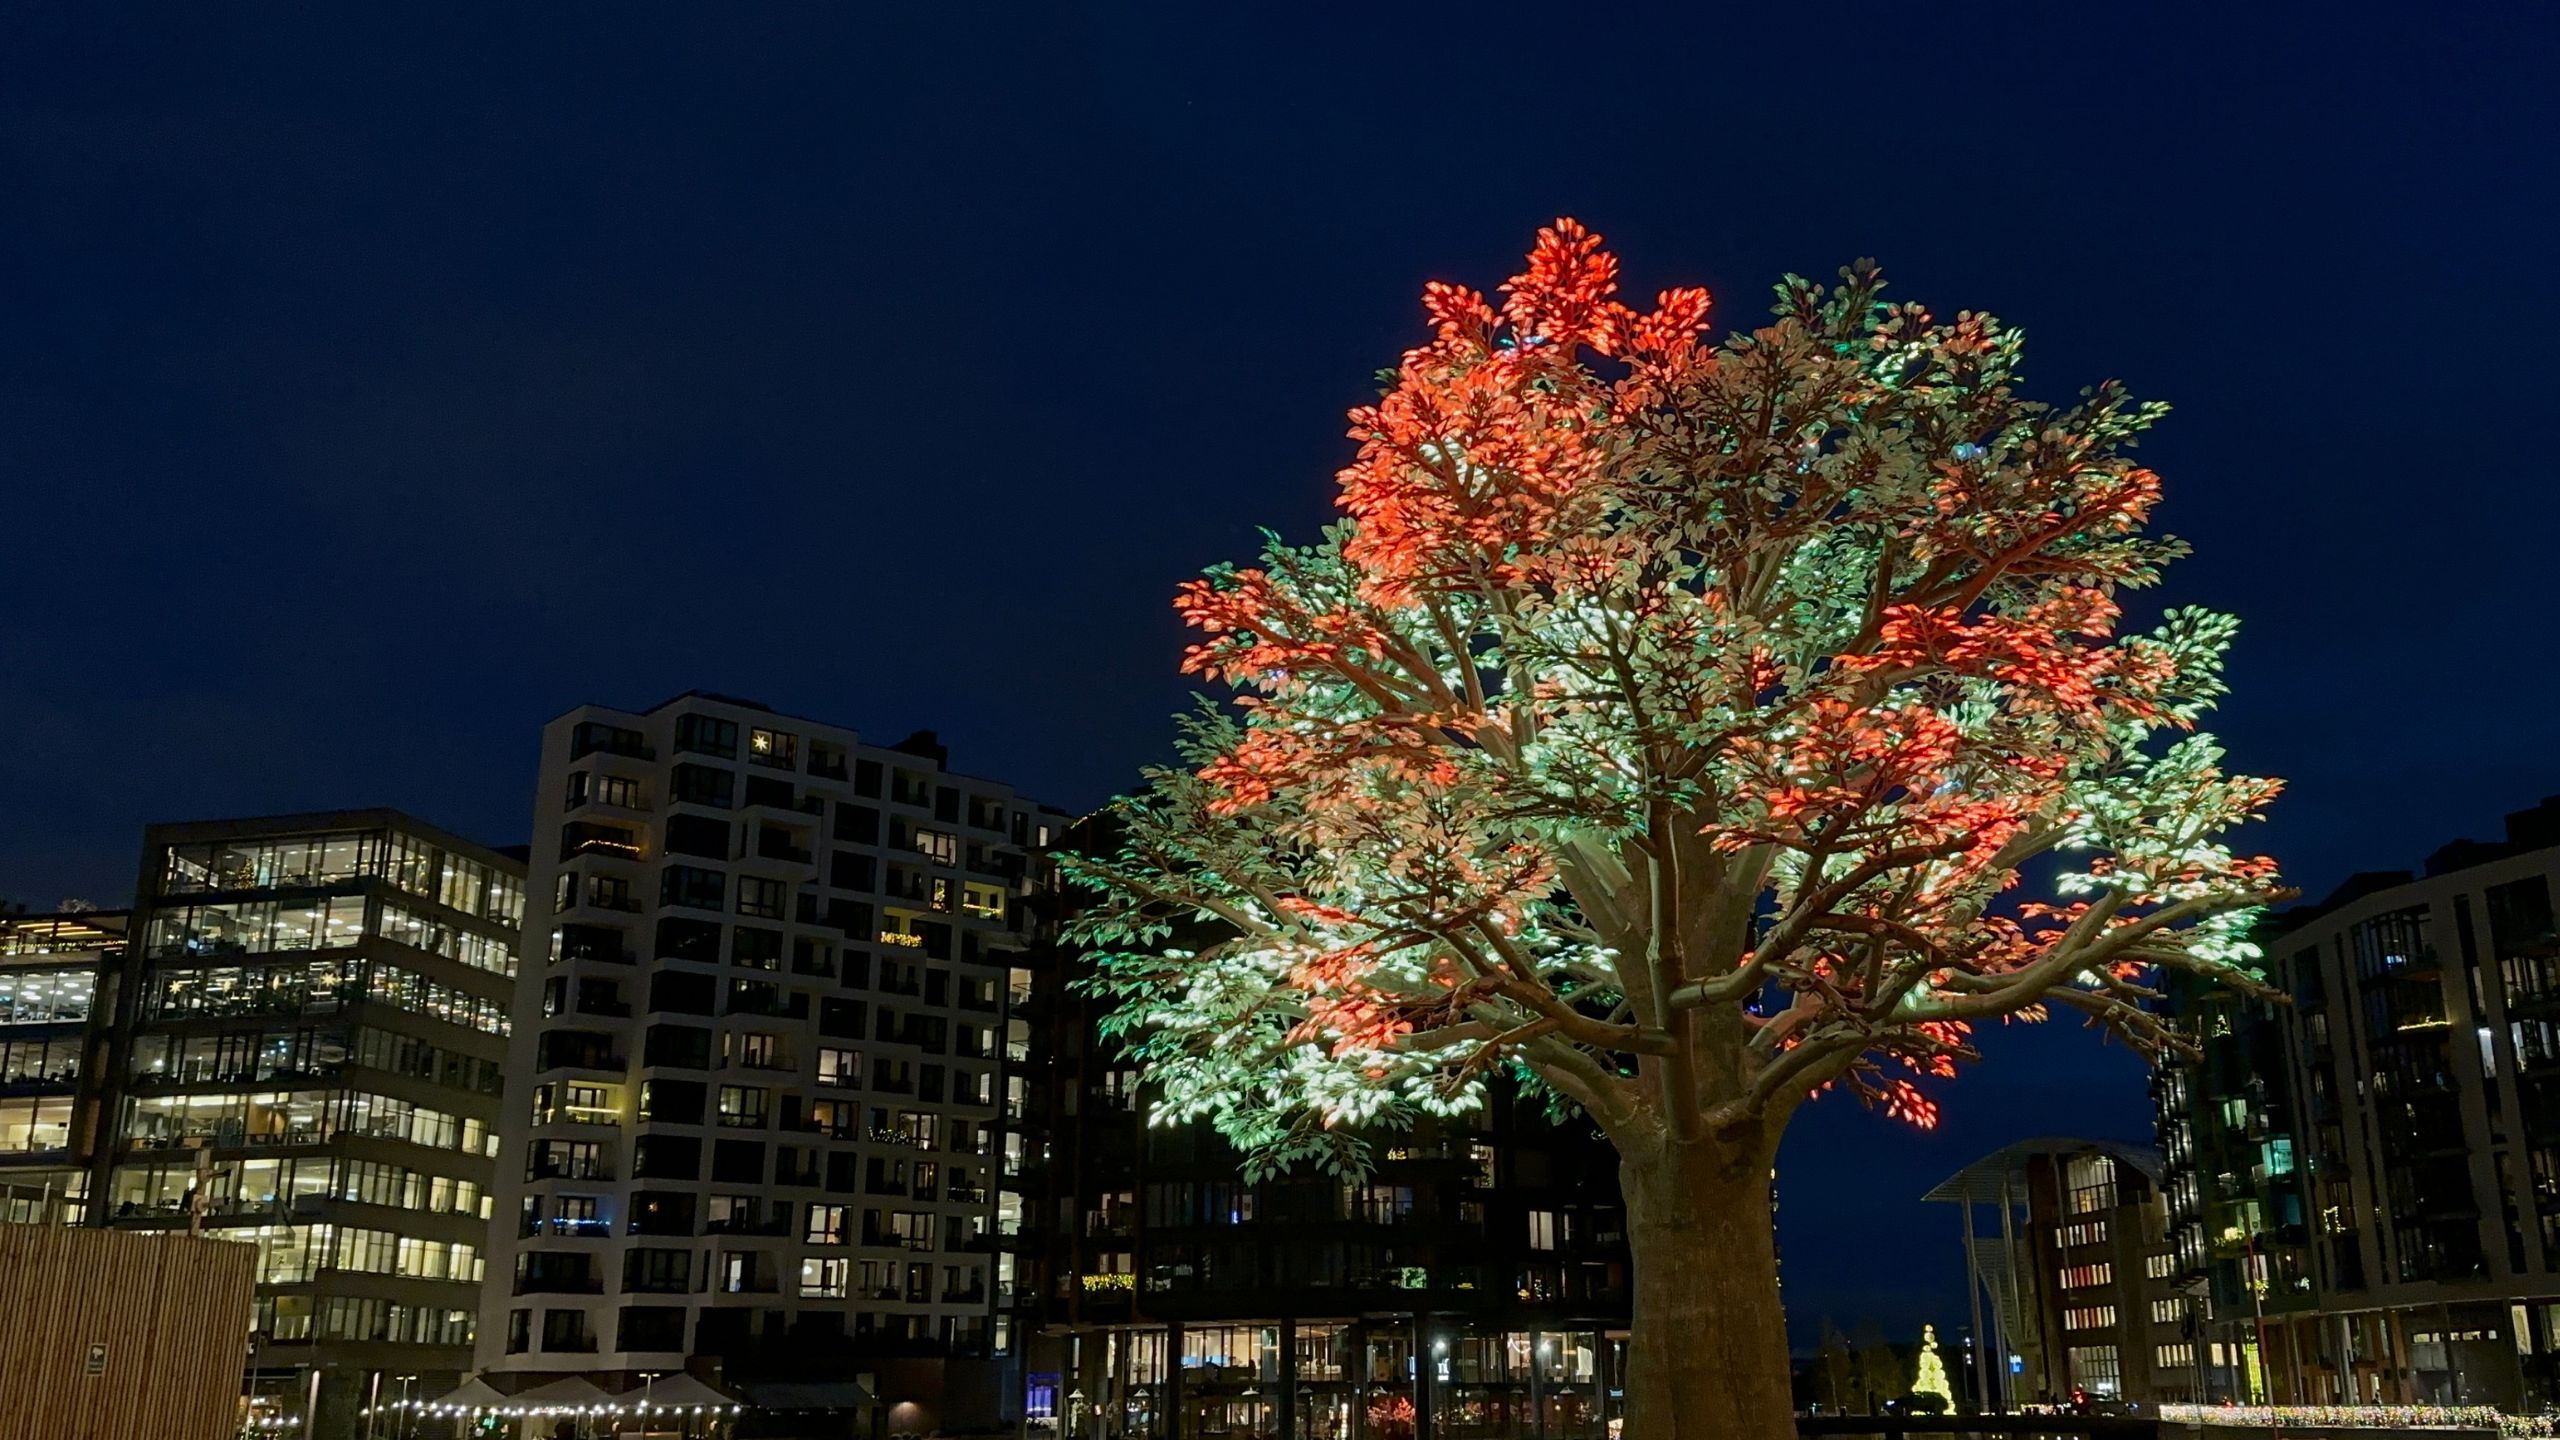 The Oslo Tree lit up in a winter evening.